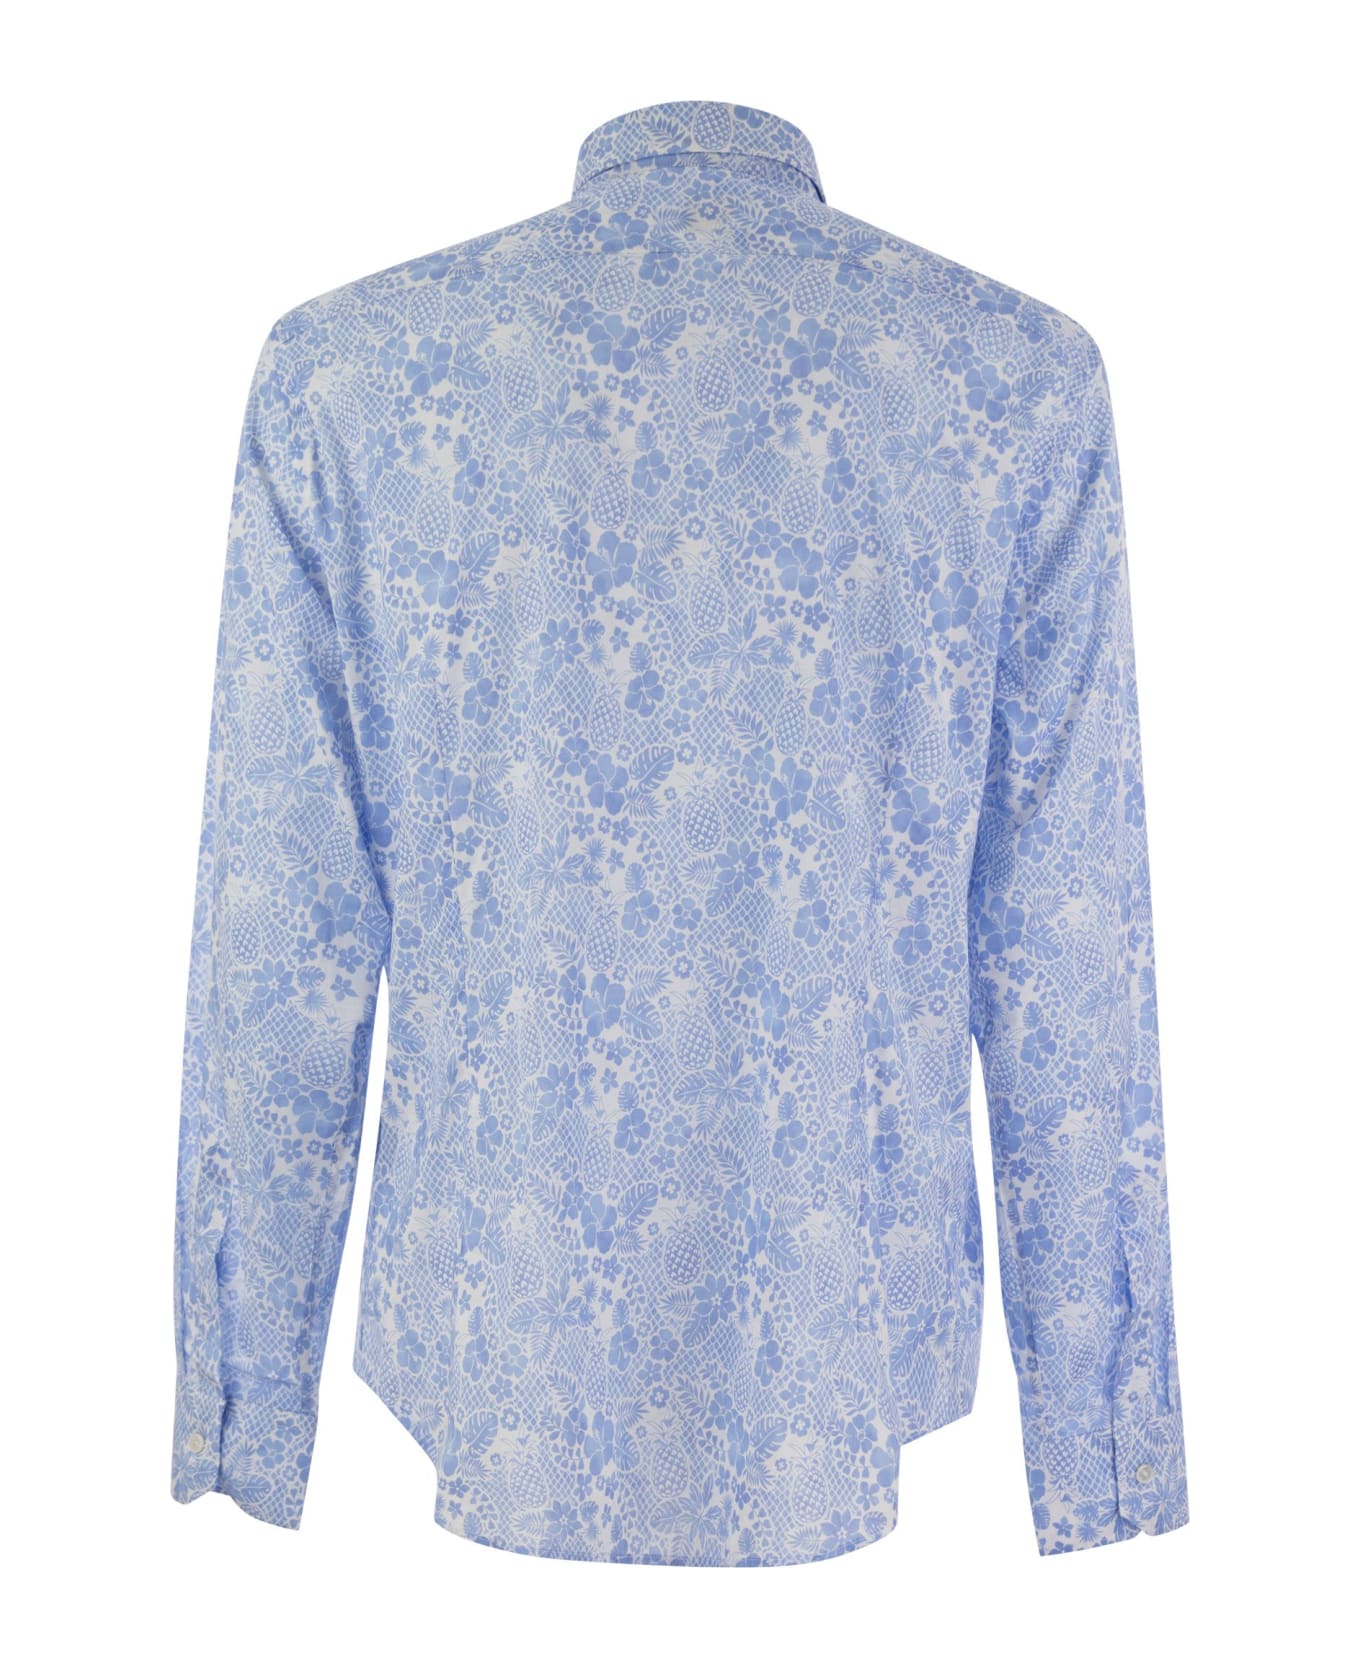 Fedeli Printed Stretch Cotton Voile Shirt - Light Blue シャツ